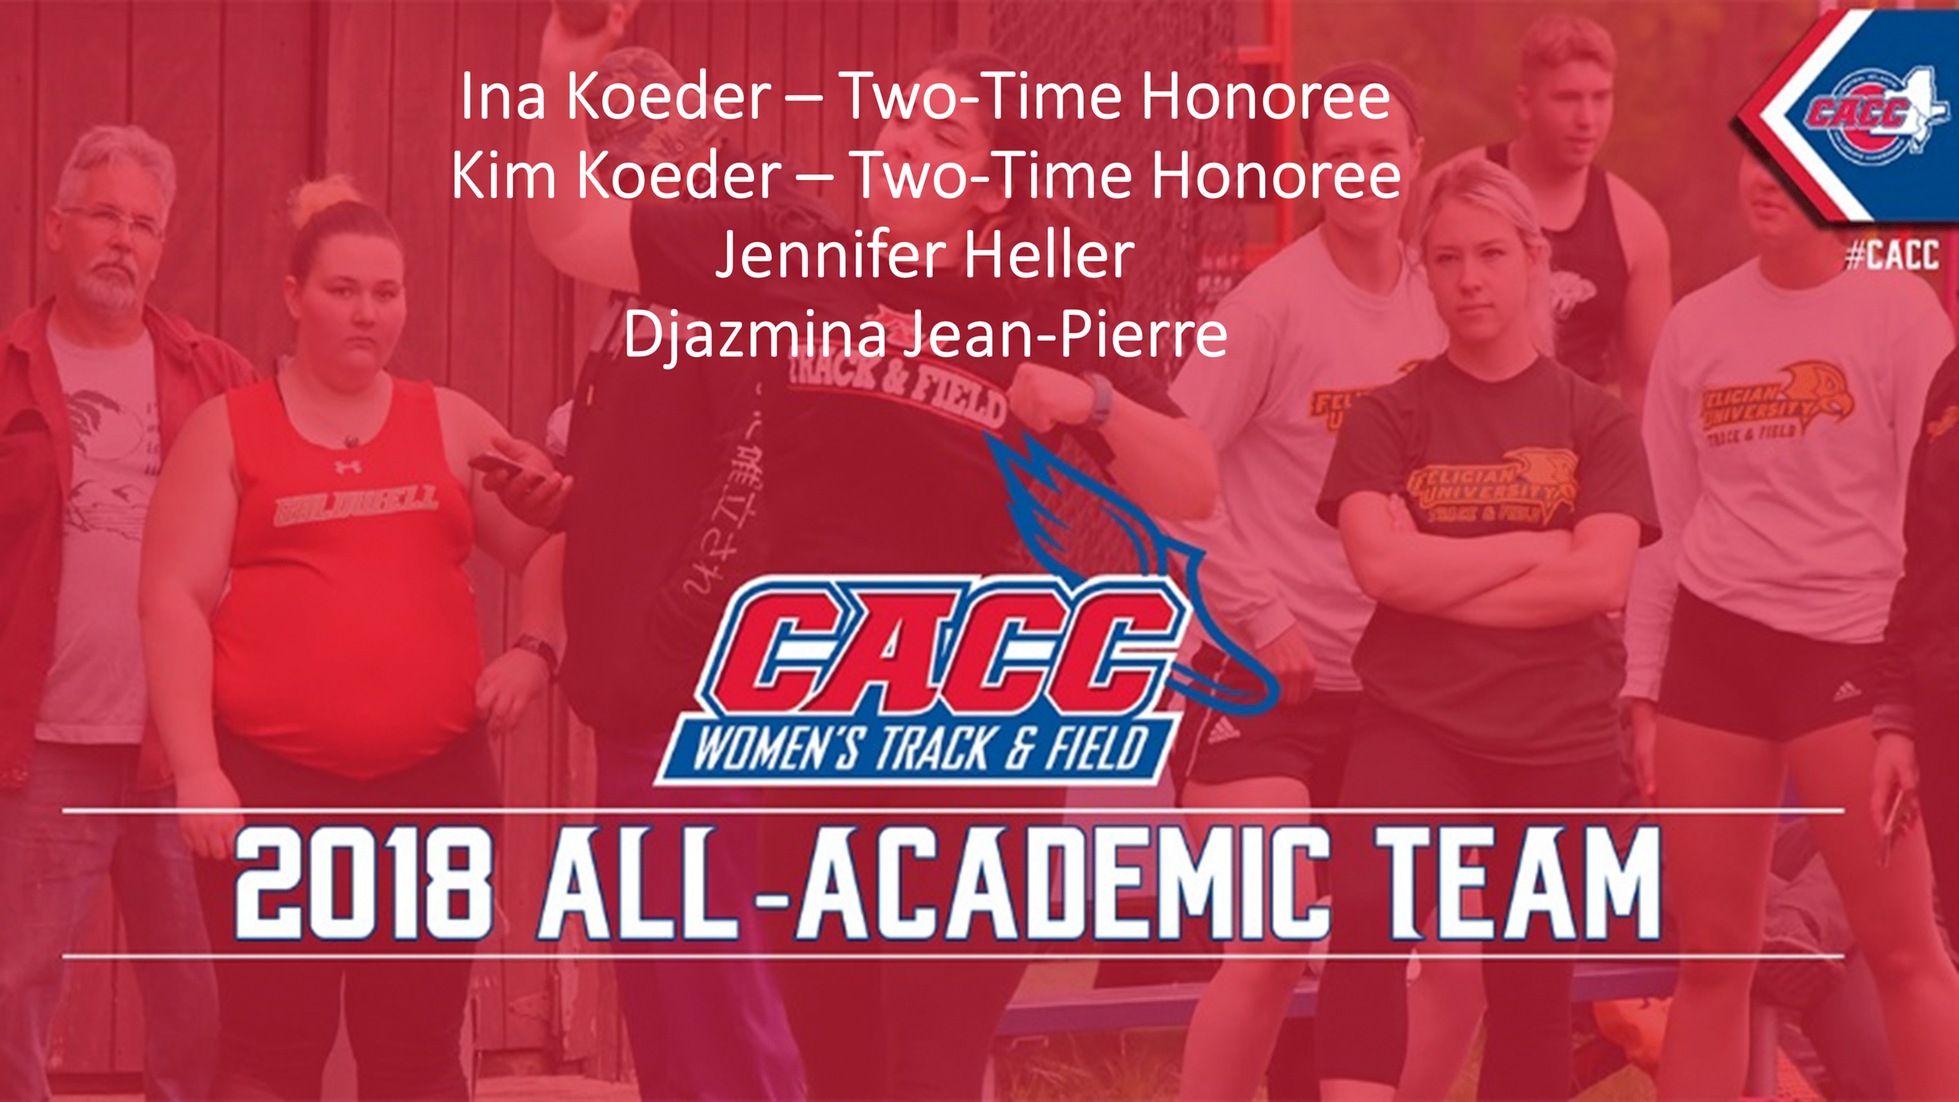 The CACC released the 2018 CACC All-Academic Team in the sport of Women's Track